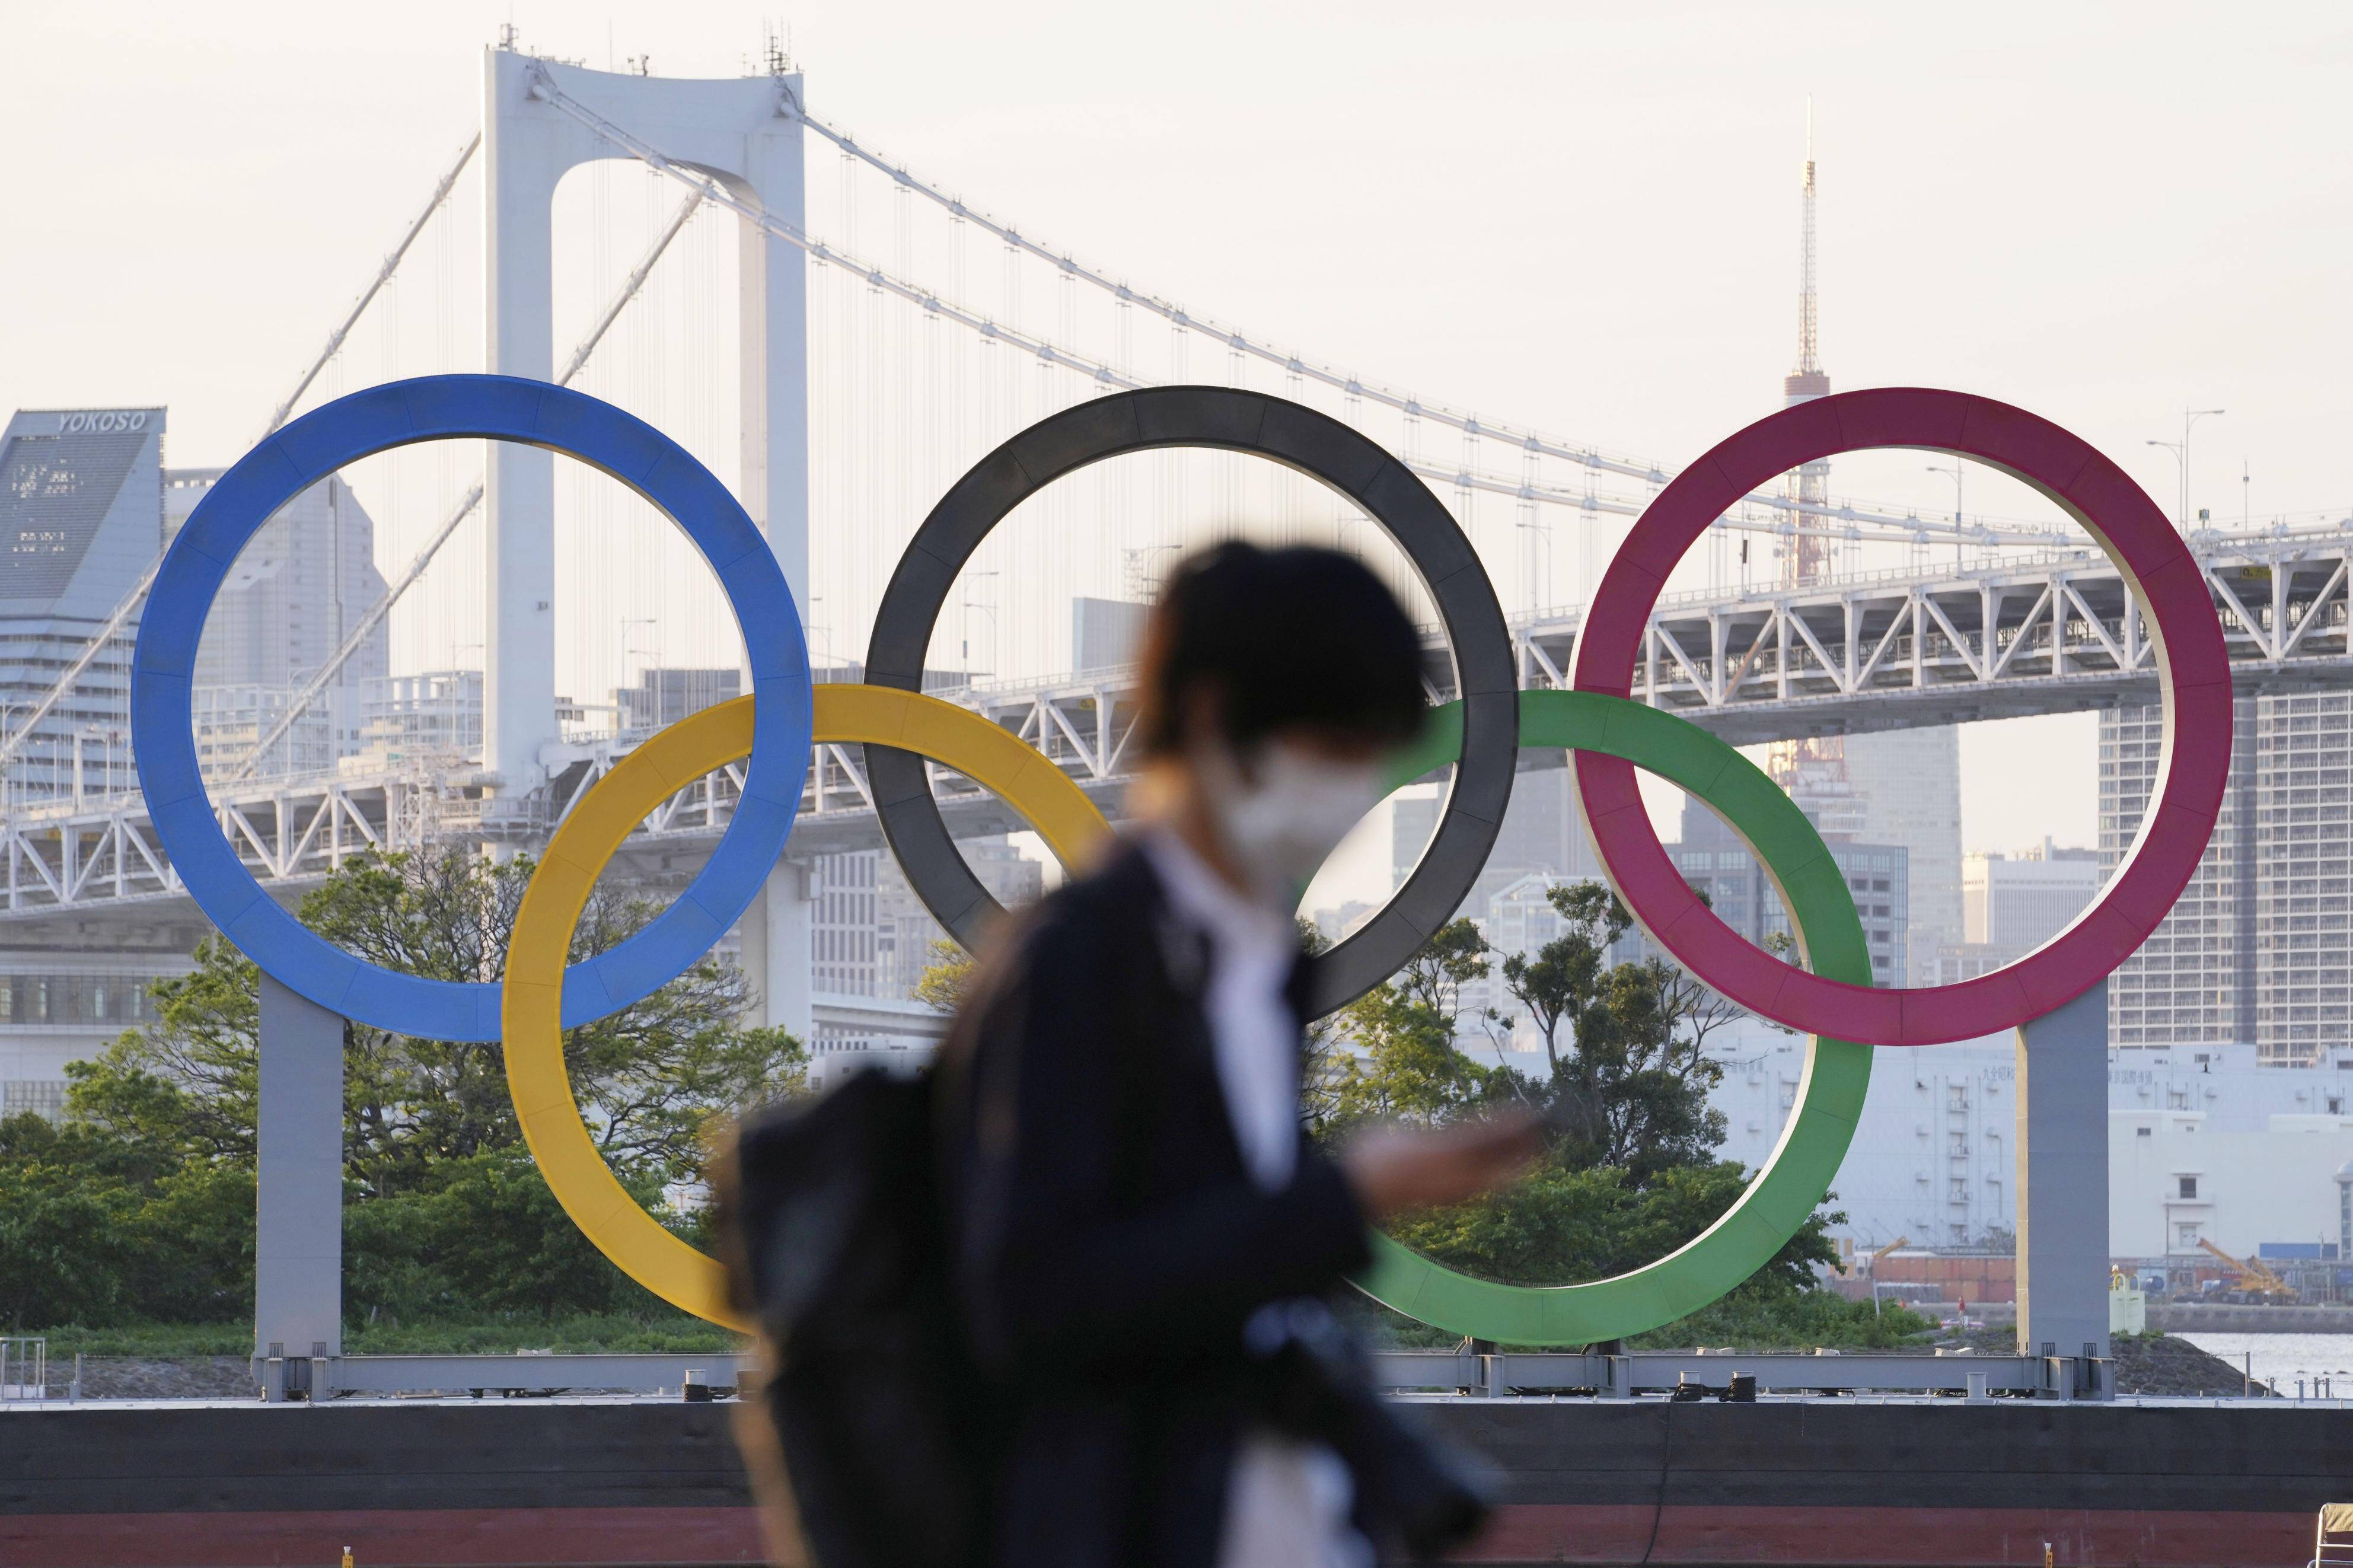 Olympic Rings Monument Photo Shows An Olympic Rings Monument In Tokyo S Odaiba Waterfront Area On April 23, 2021. Japan